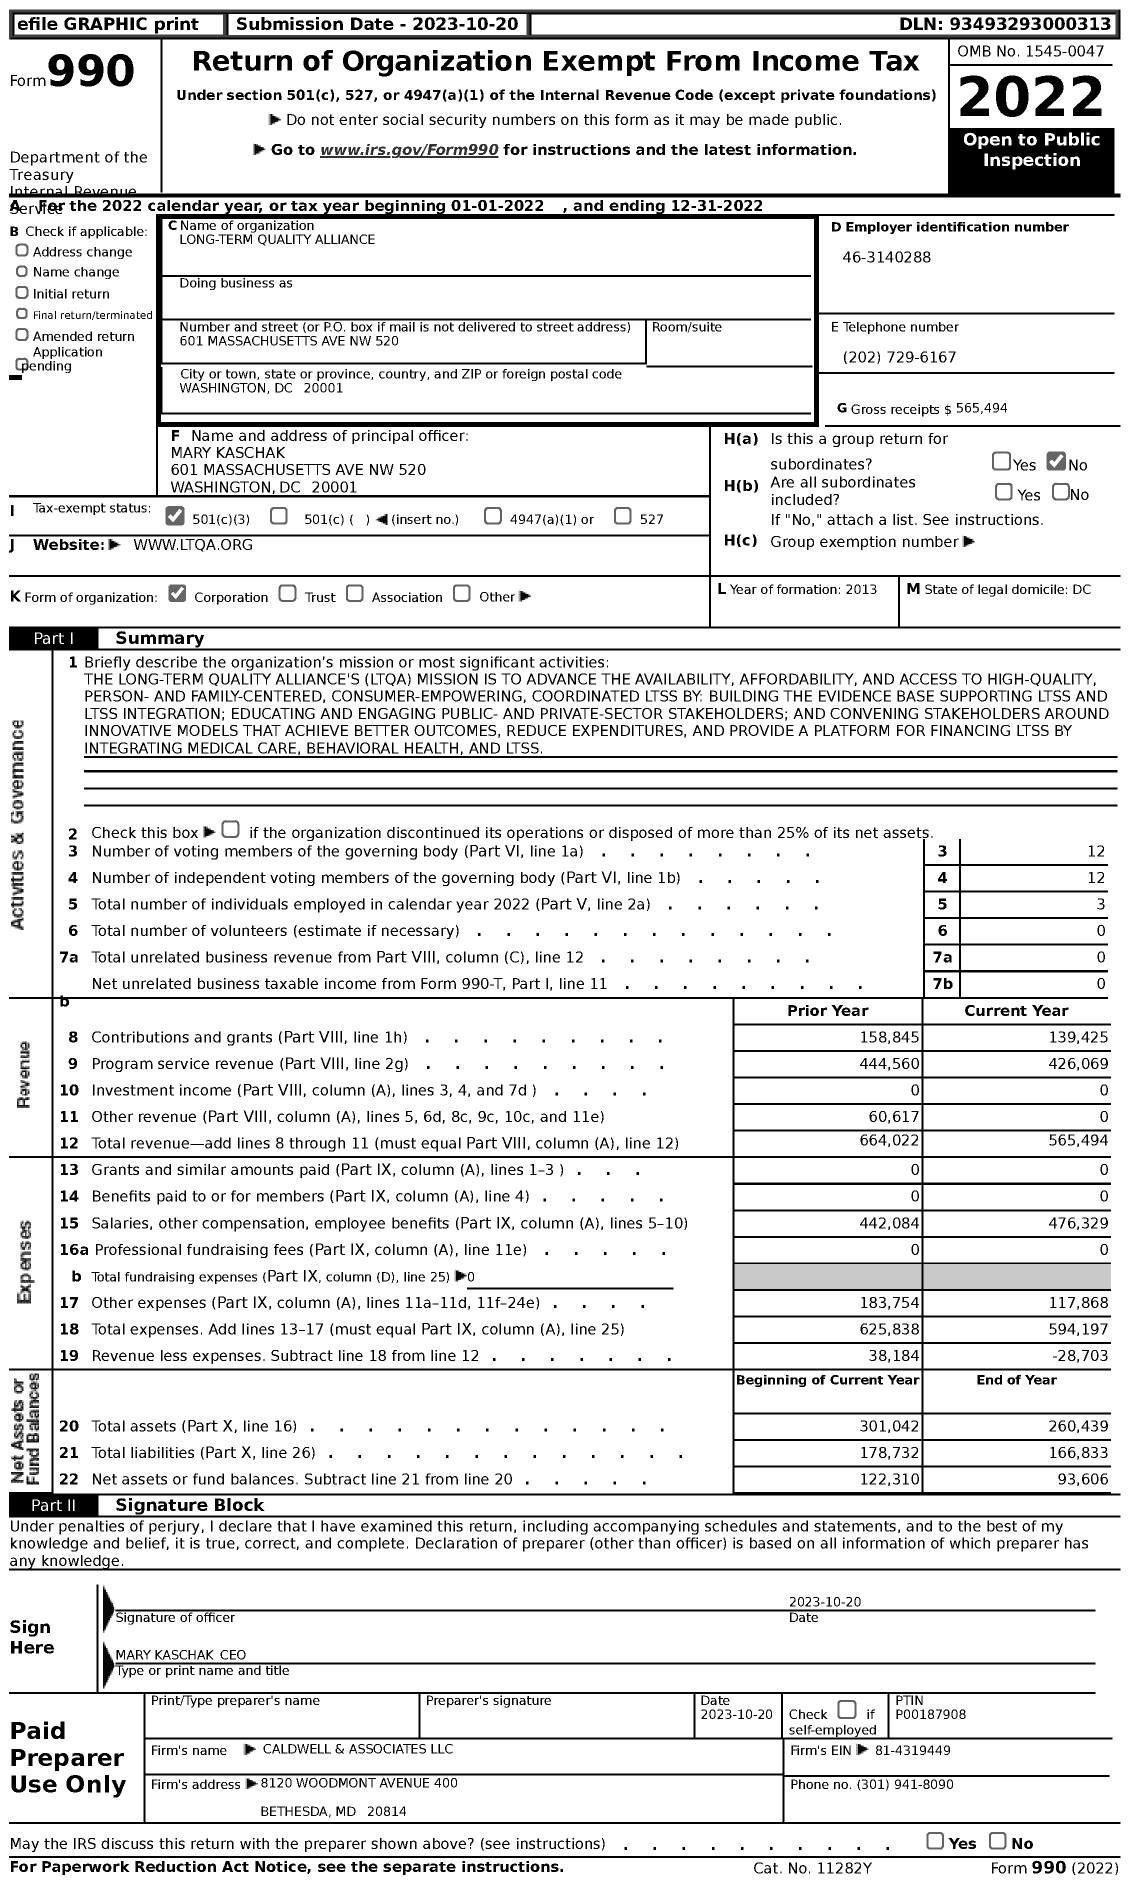 Image of first page of 2022 Form 990 for Long-Term Quality Alliance